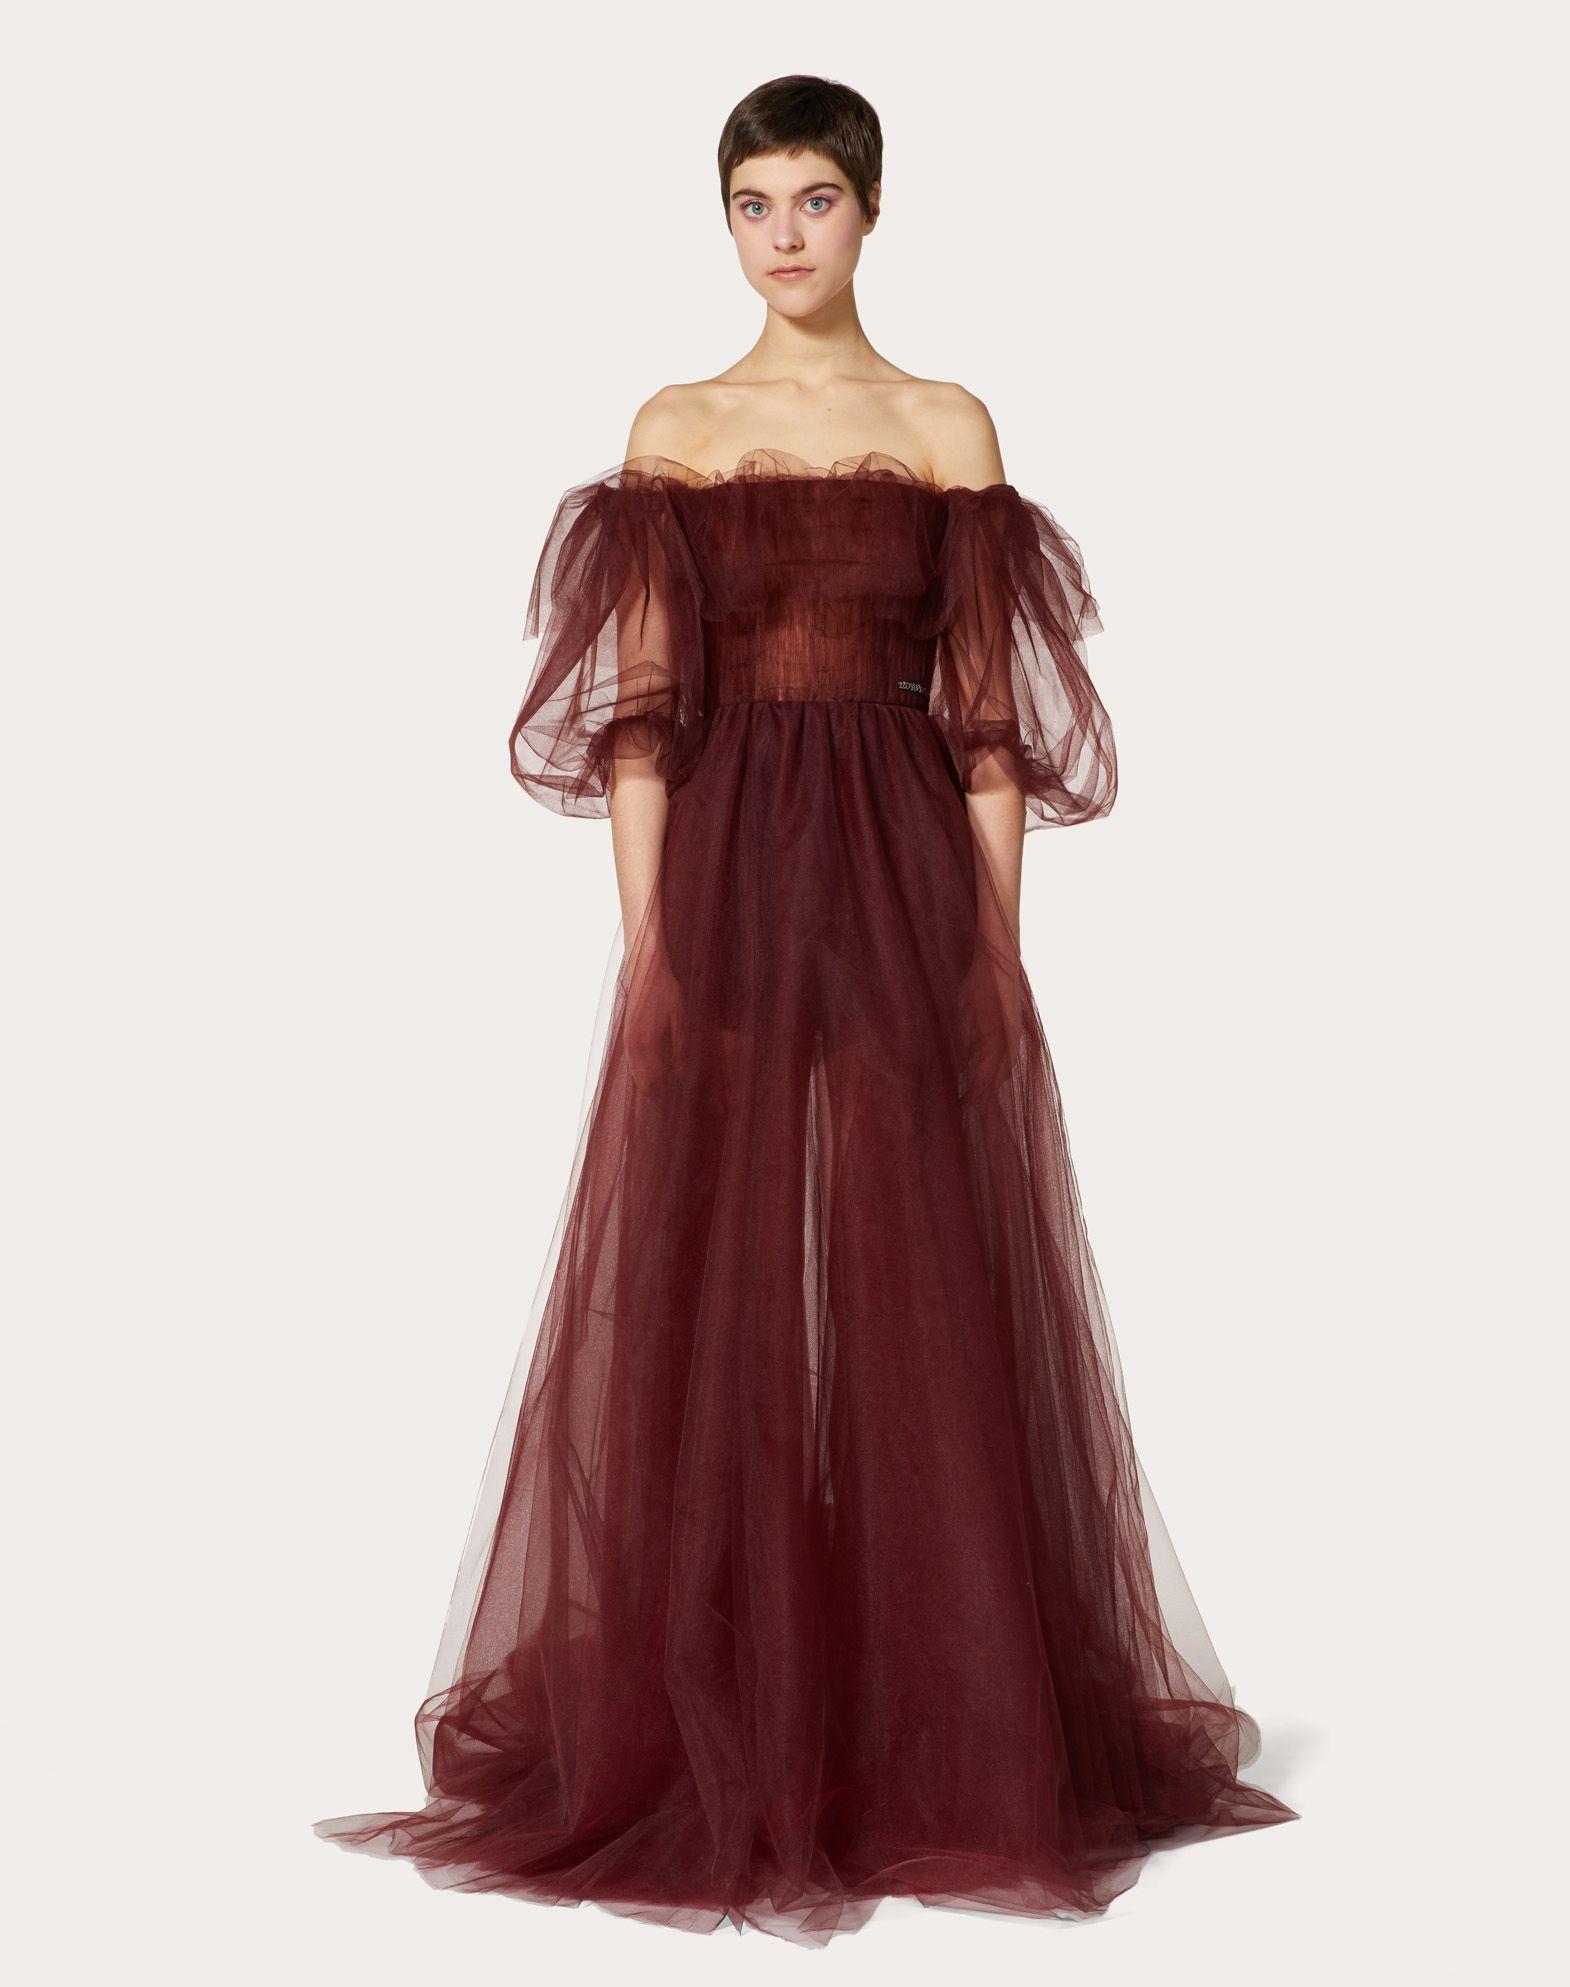 Valentino Evening Dresses Hotsell, GET 51% OFF, www.halotreeservice.com